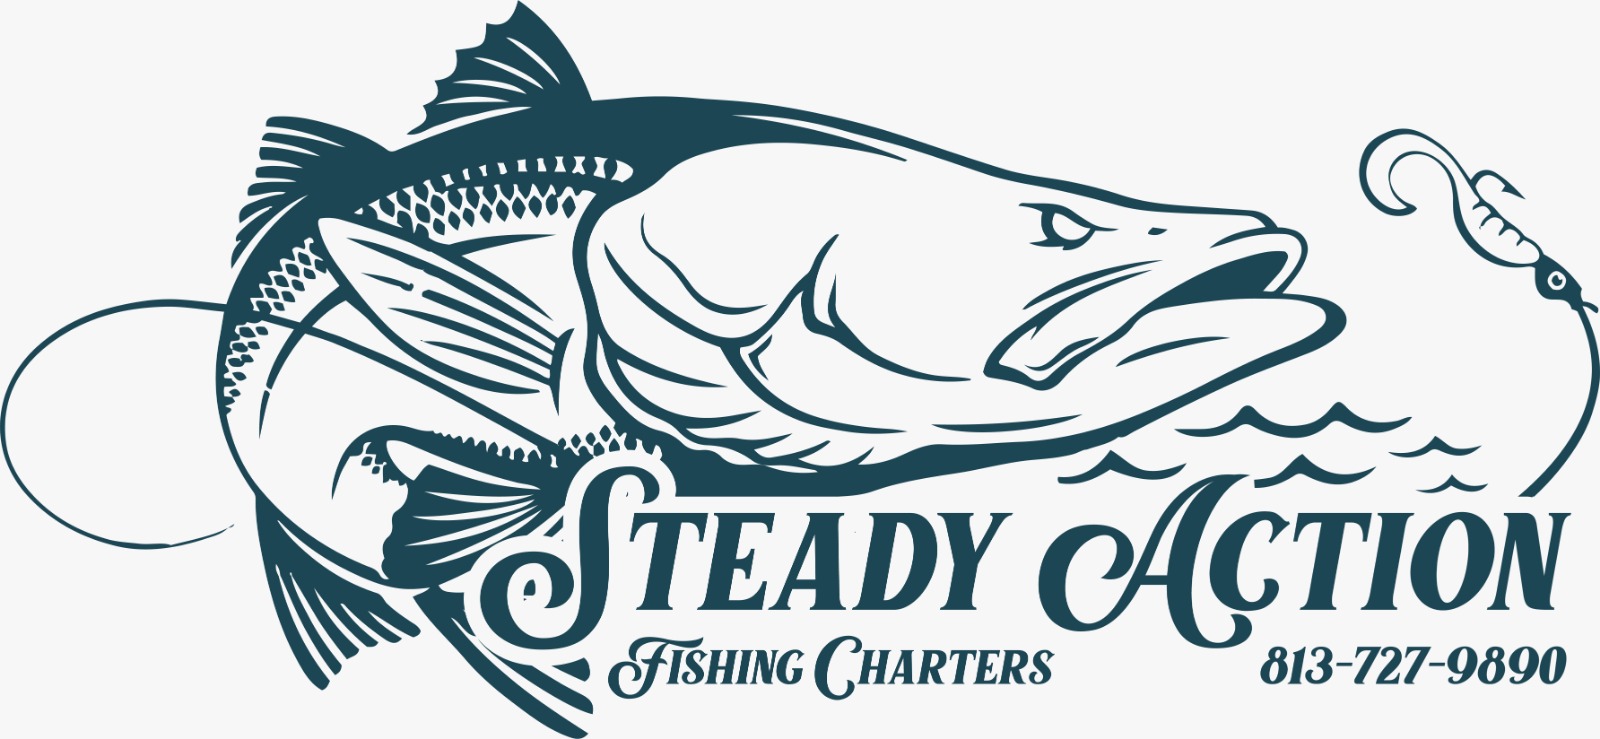 Steady Action Fishing Charters